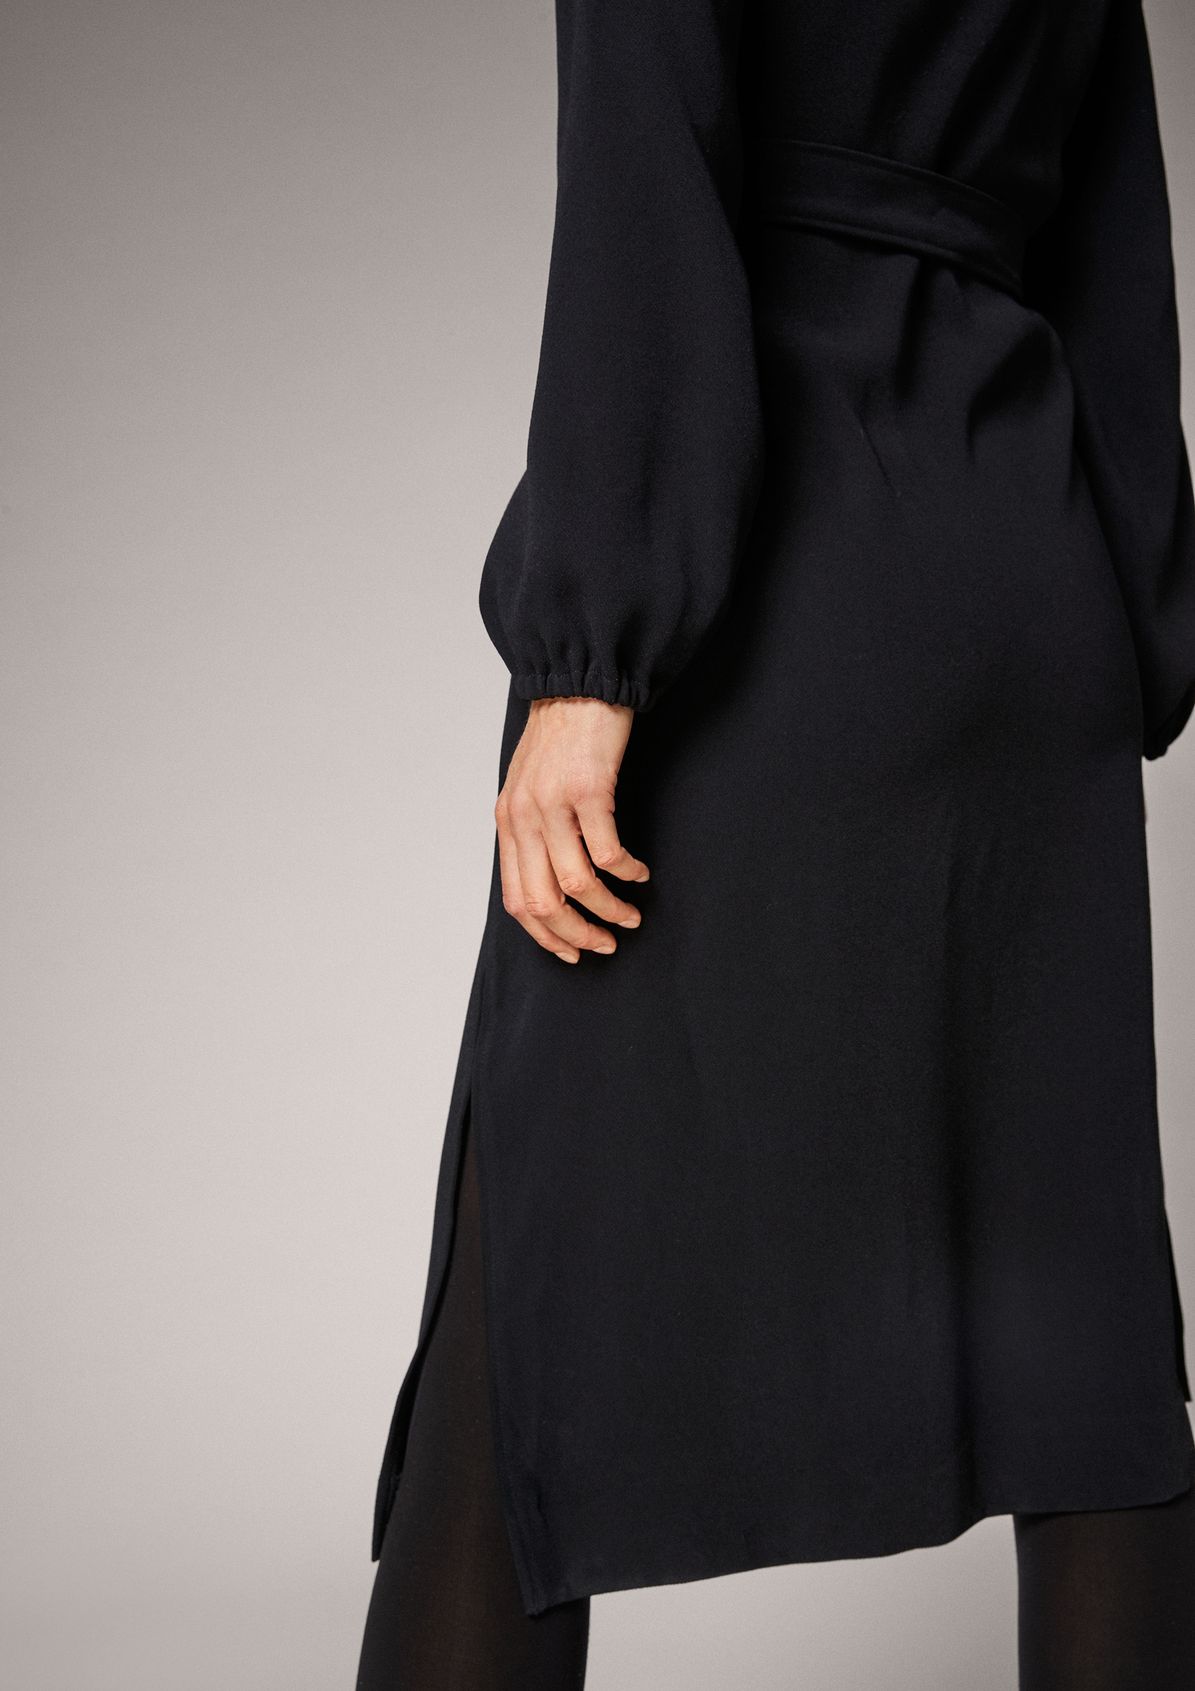 Shirt dress with twill texture from comma